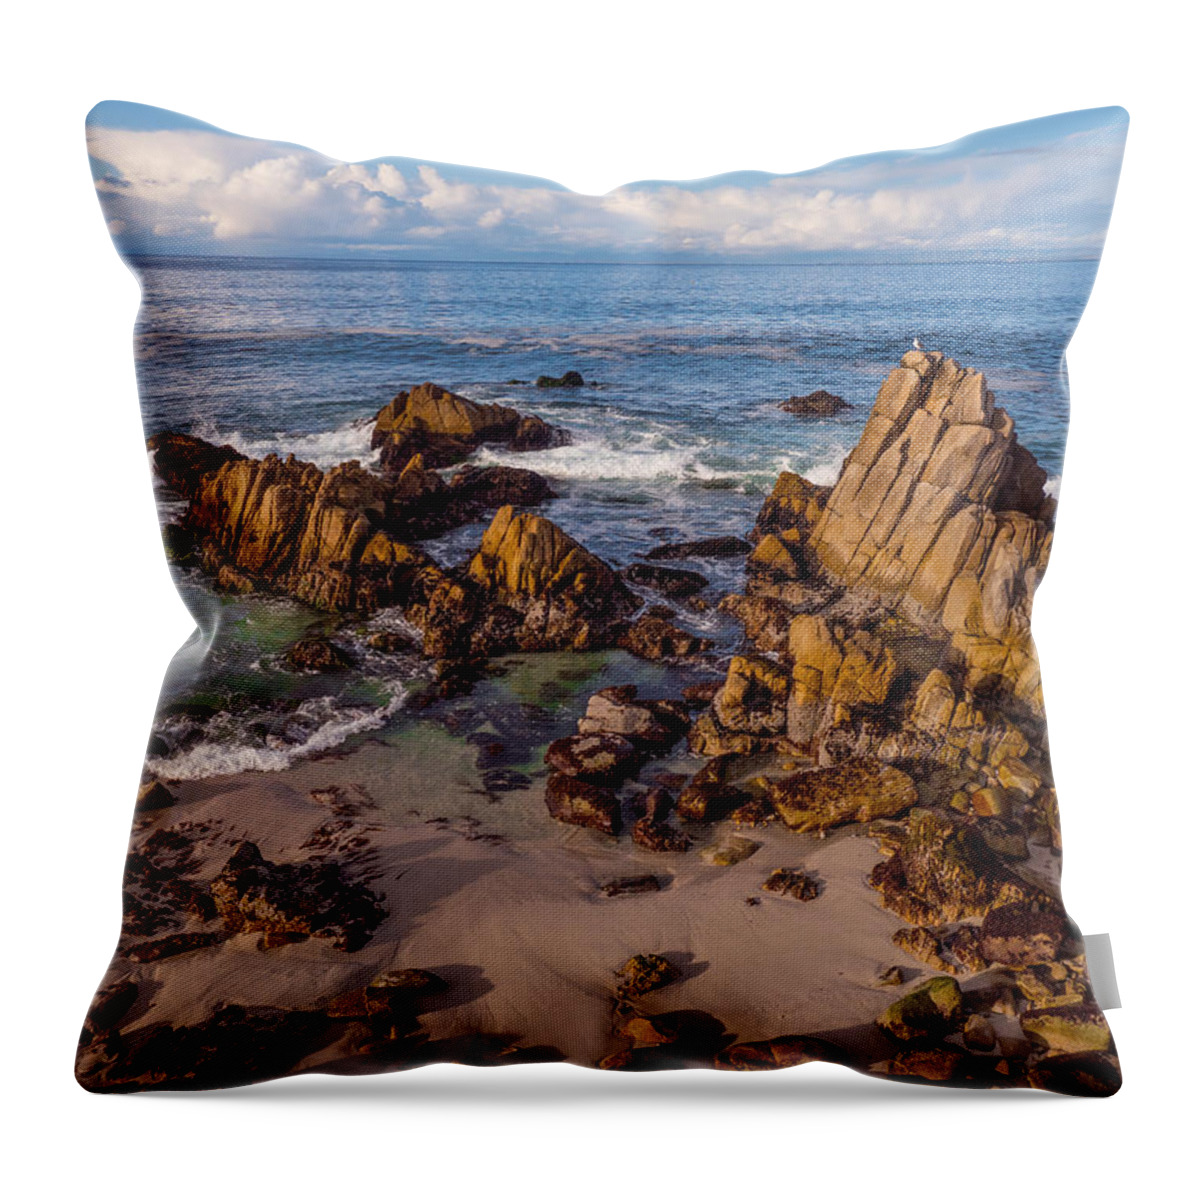 Lover's Point Throw Pillow featuring the photograph Lover's Point by Derek Dean